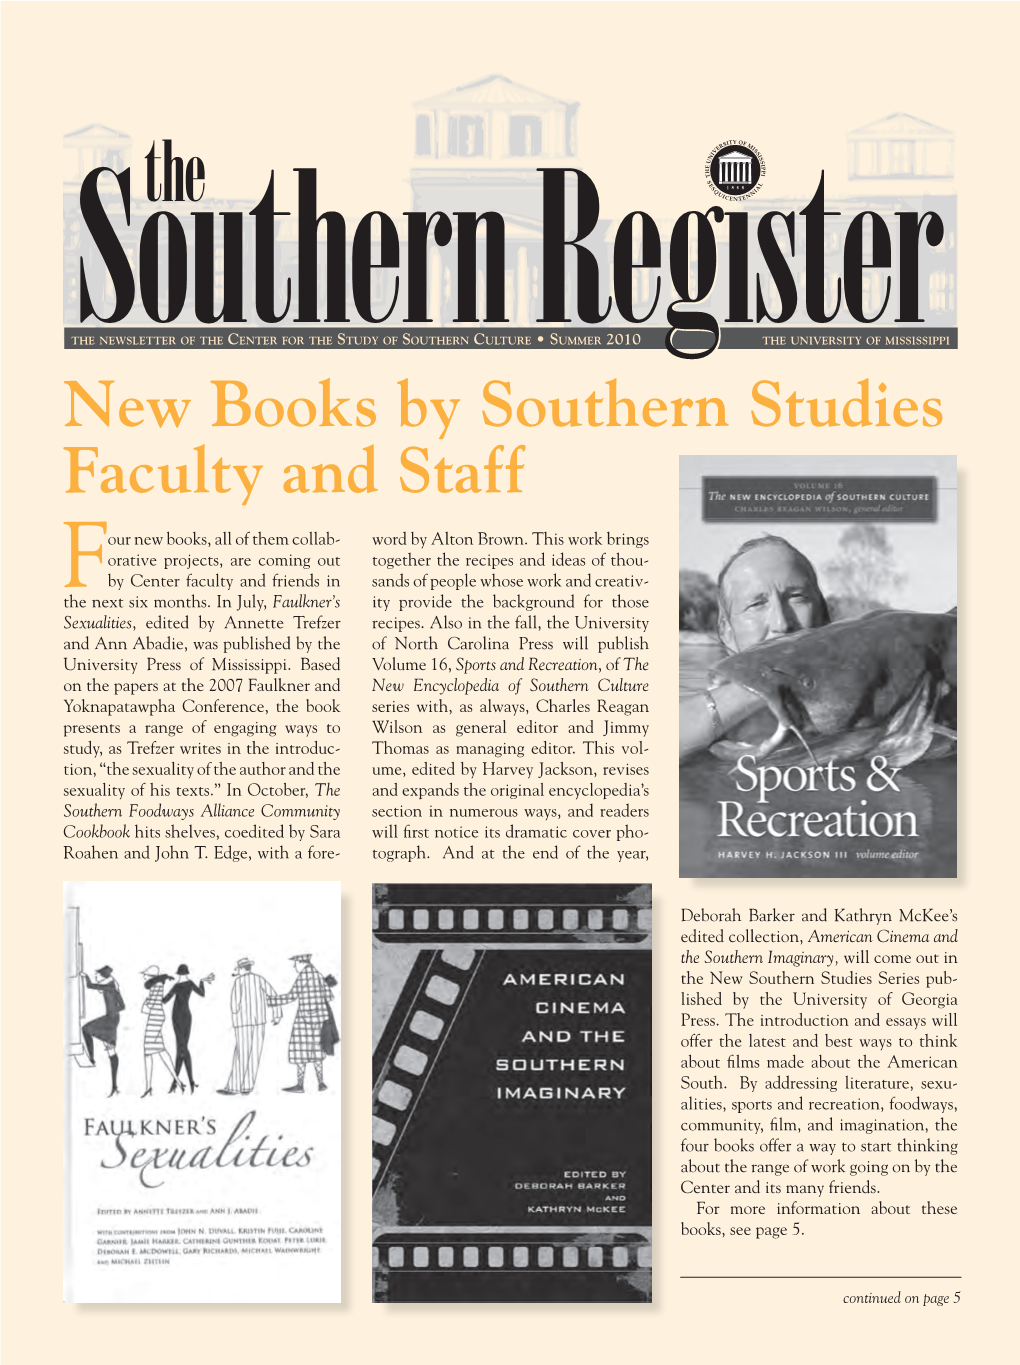 New Books by Southern Studies Faculty and Staff